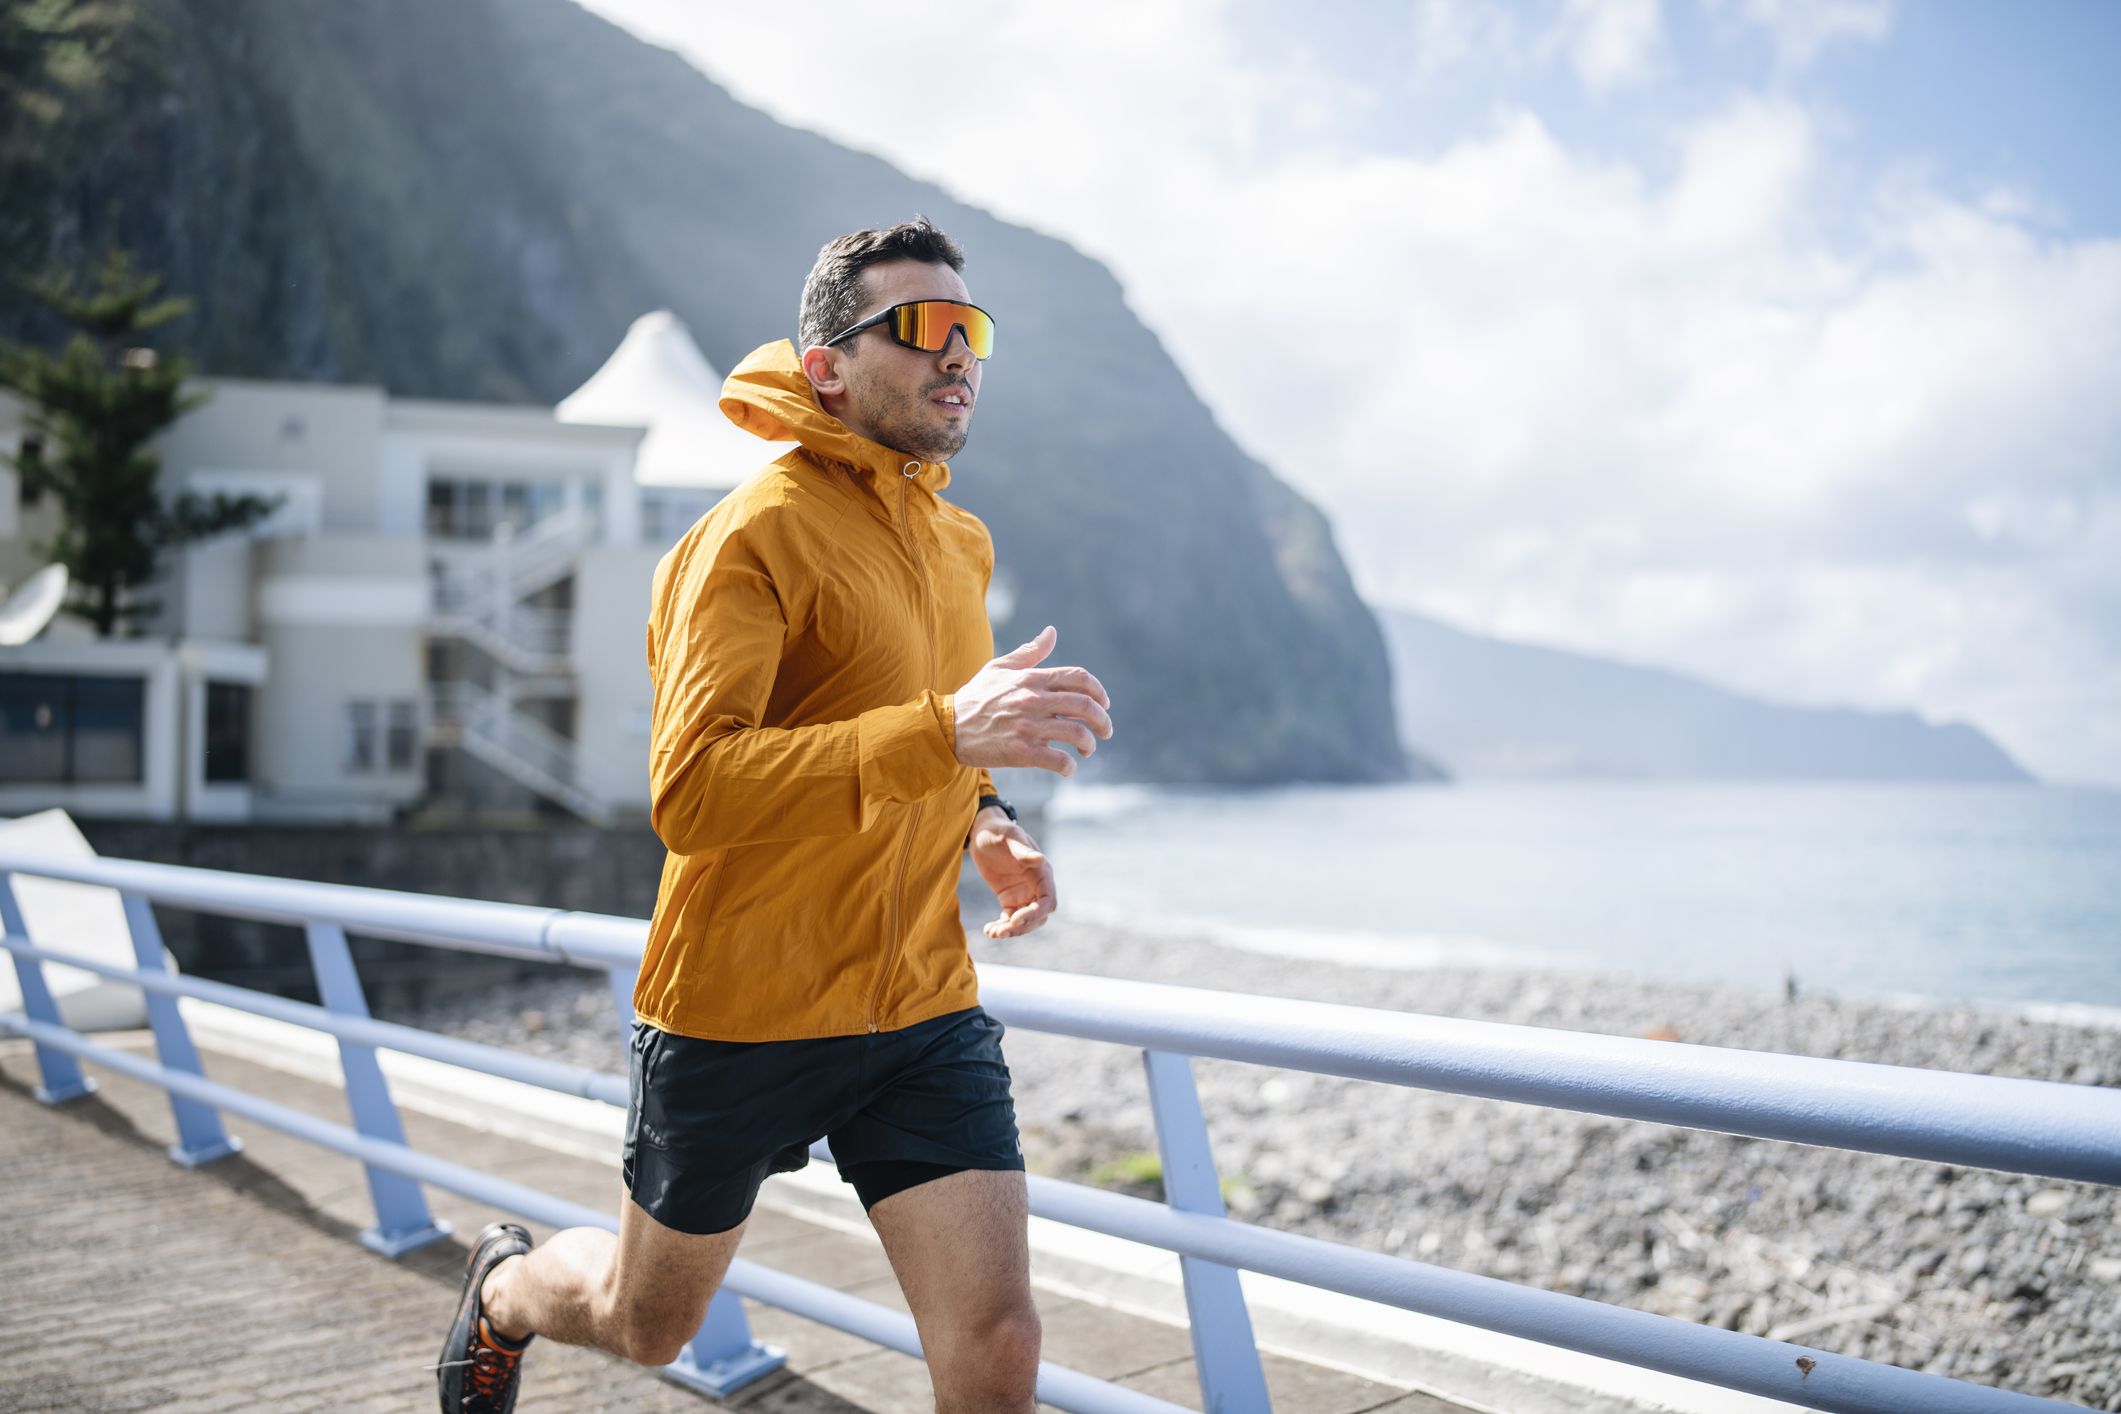 How To Choose Running Sunglasses | Safety Gear Pro